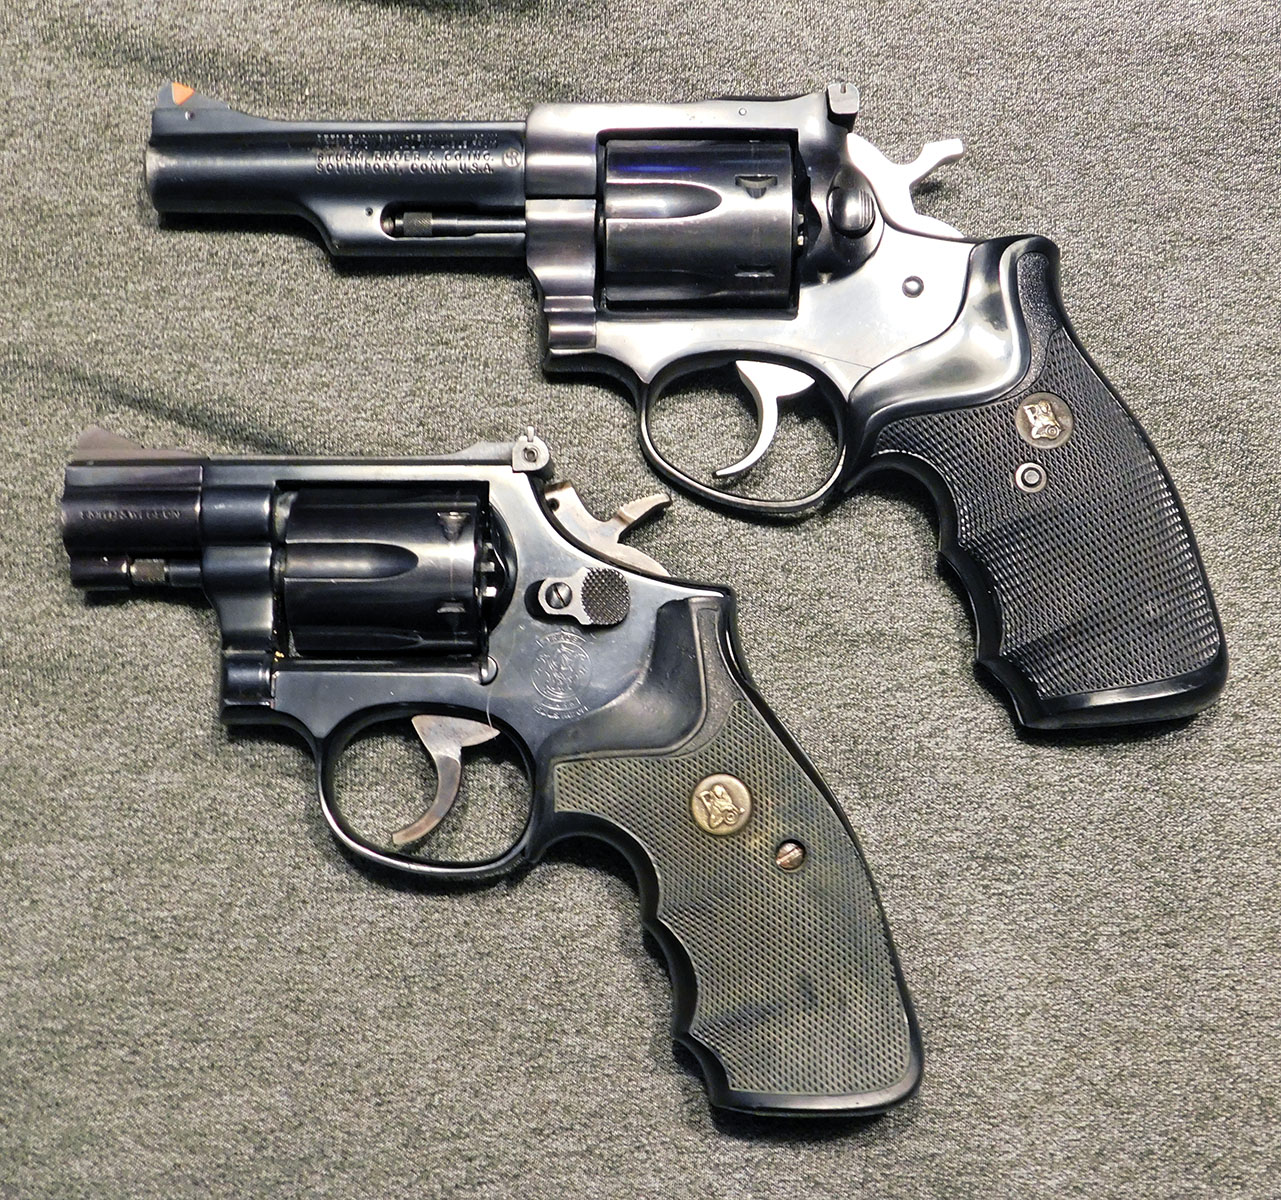 The Ruger Security Six in 357 Magnum (top) was a mainstay for police and security forces for years. A 2-inch barrel 15-4 Smith & Wesson in 38 Special is shown below. Both are fine revolvers. The confusion my friends suffered was caused by caliber rather than cartridge.